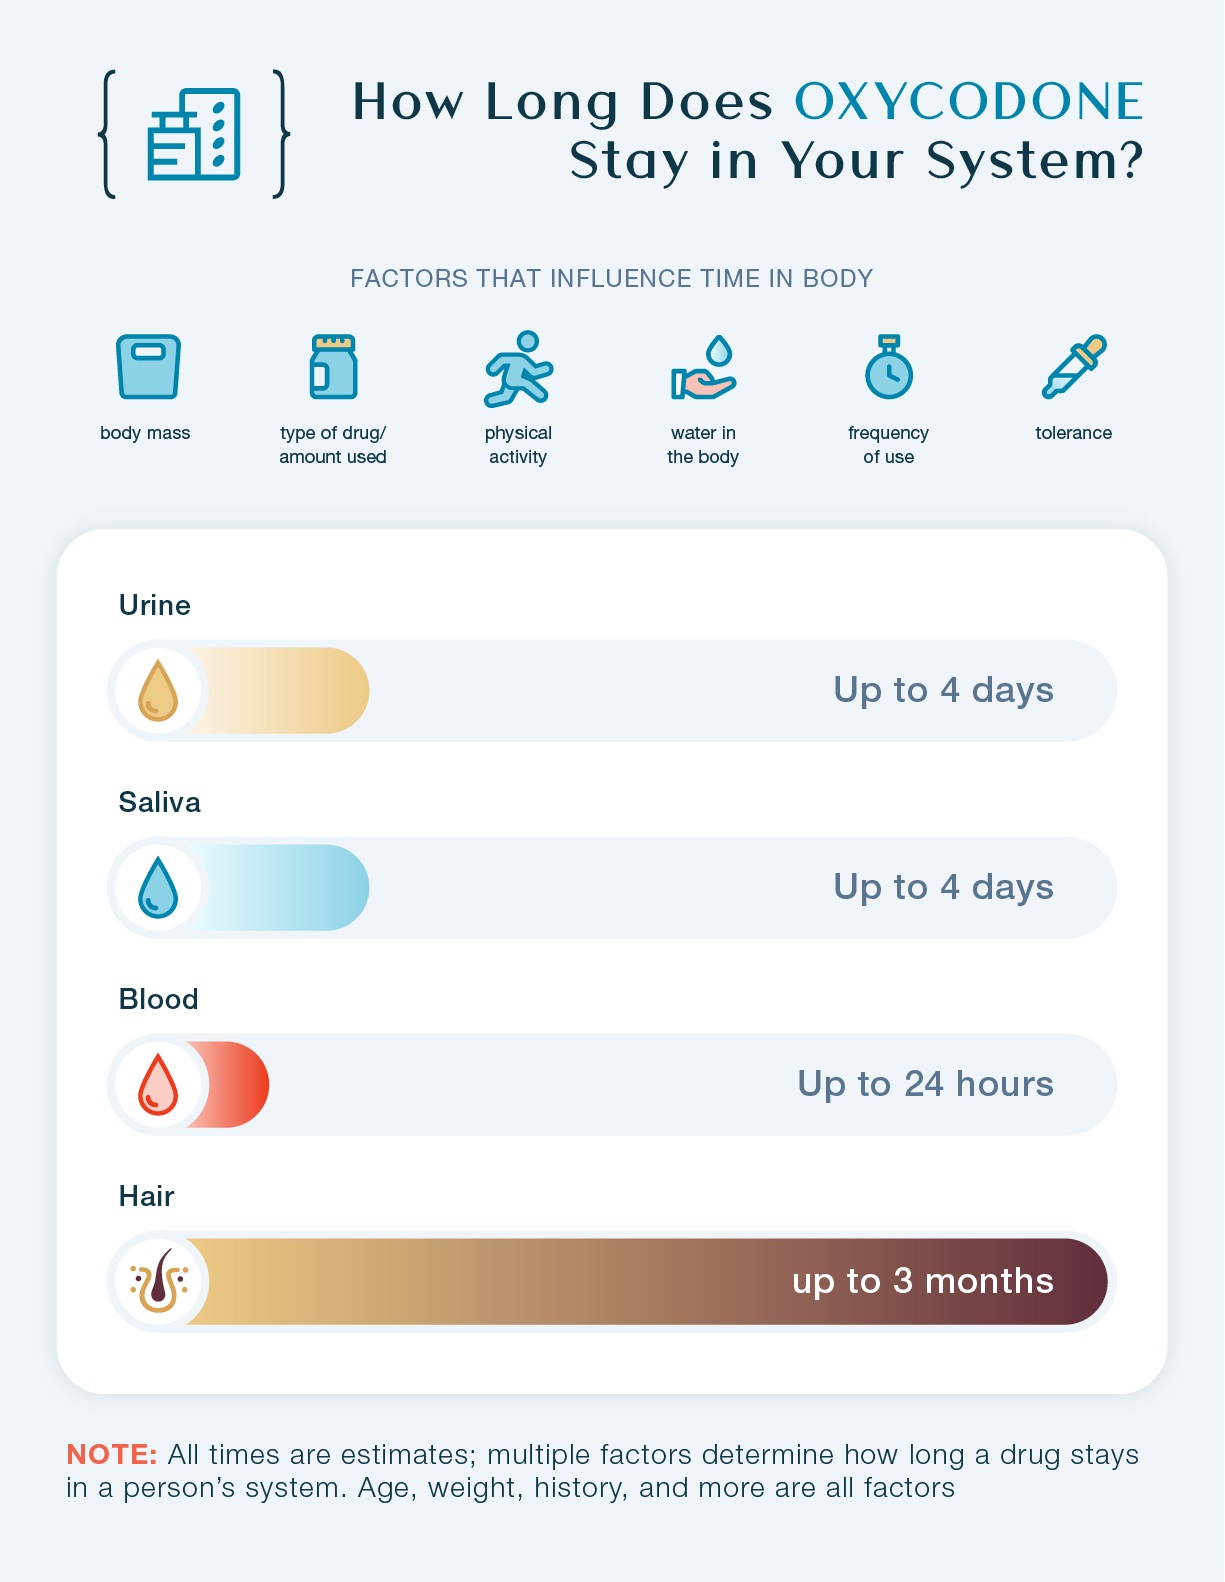 How long does Oxycodone stay in your system? This chart shows how long Oxycodone stays in urine, saliva, blood, and hair